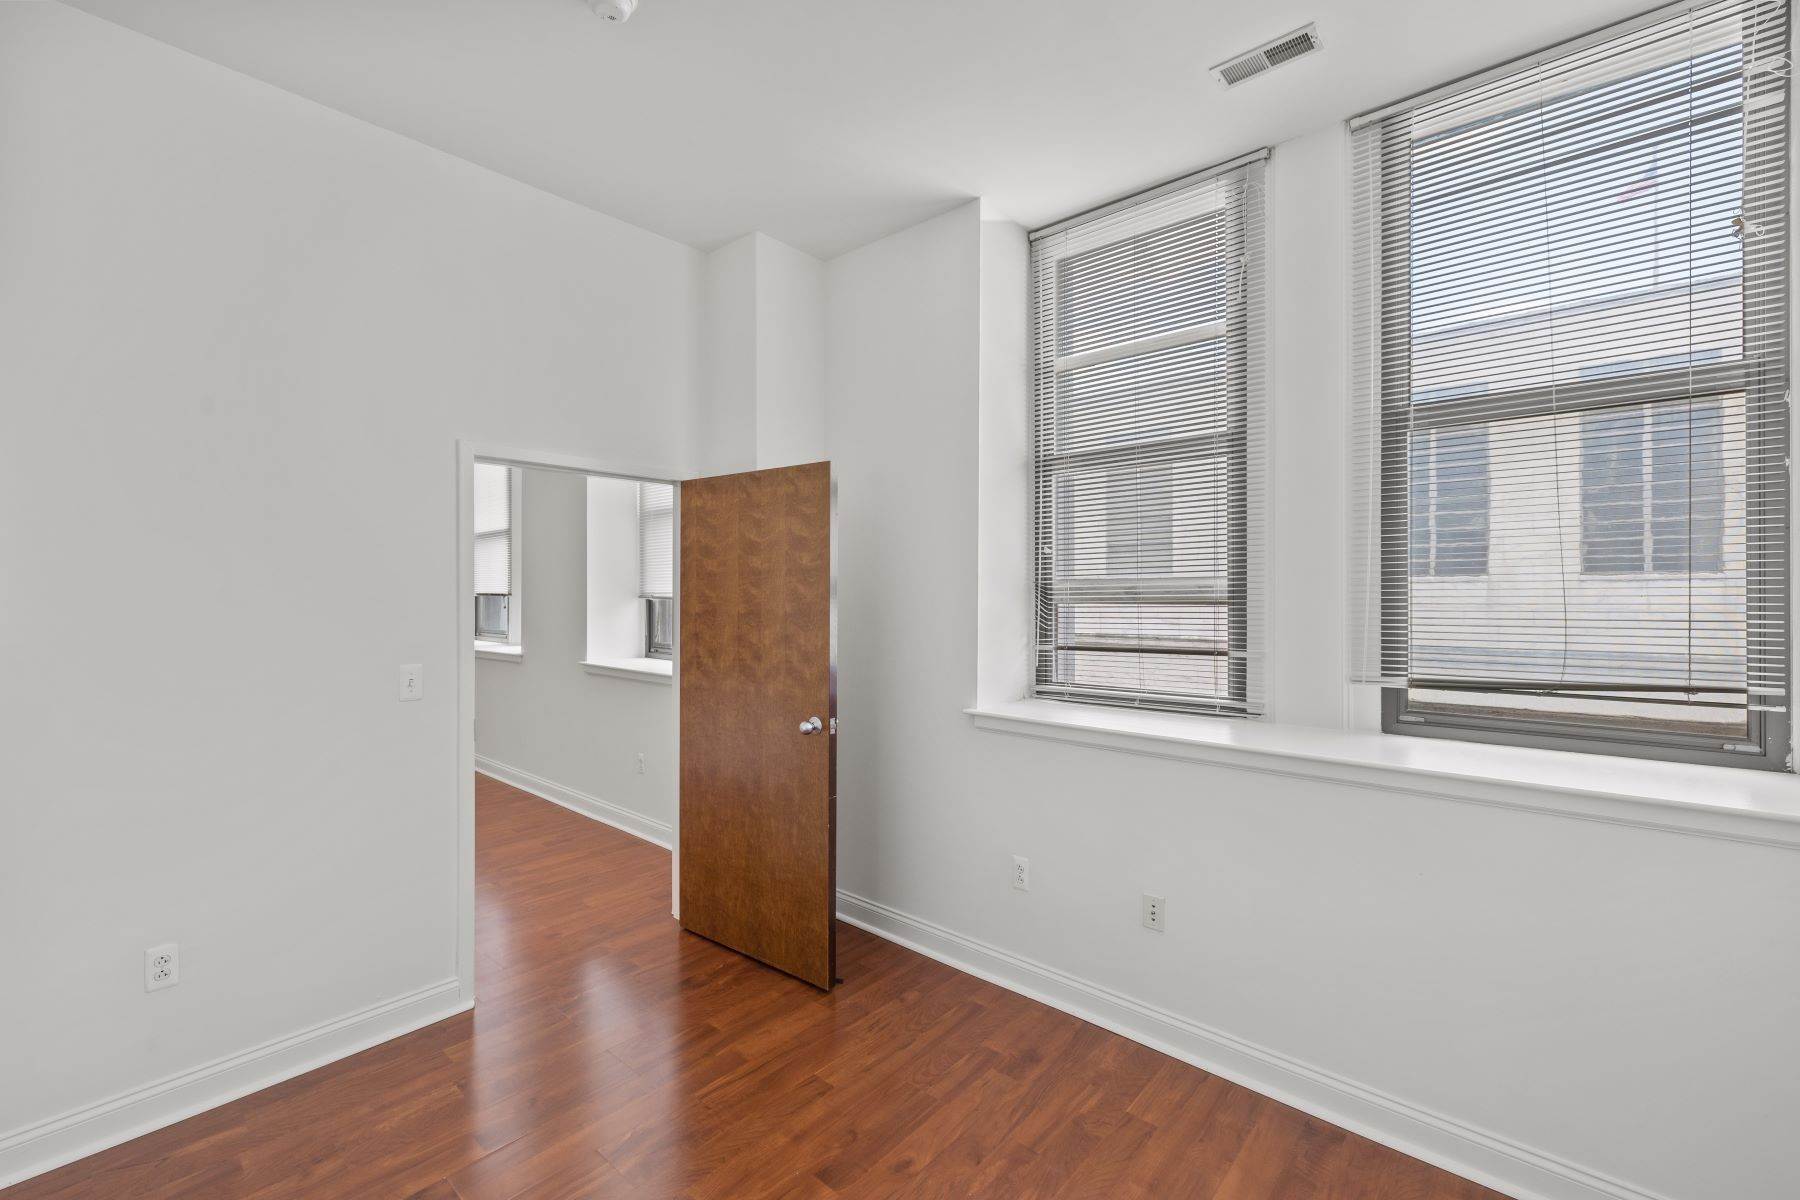 16. Condominiums for Sale at 1001-13 Chestnut Street, Philadelphia, PA 19107 1001-13 Chestnut Street, #603E Philadelphia, Pennsylvania 19107 United States